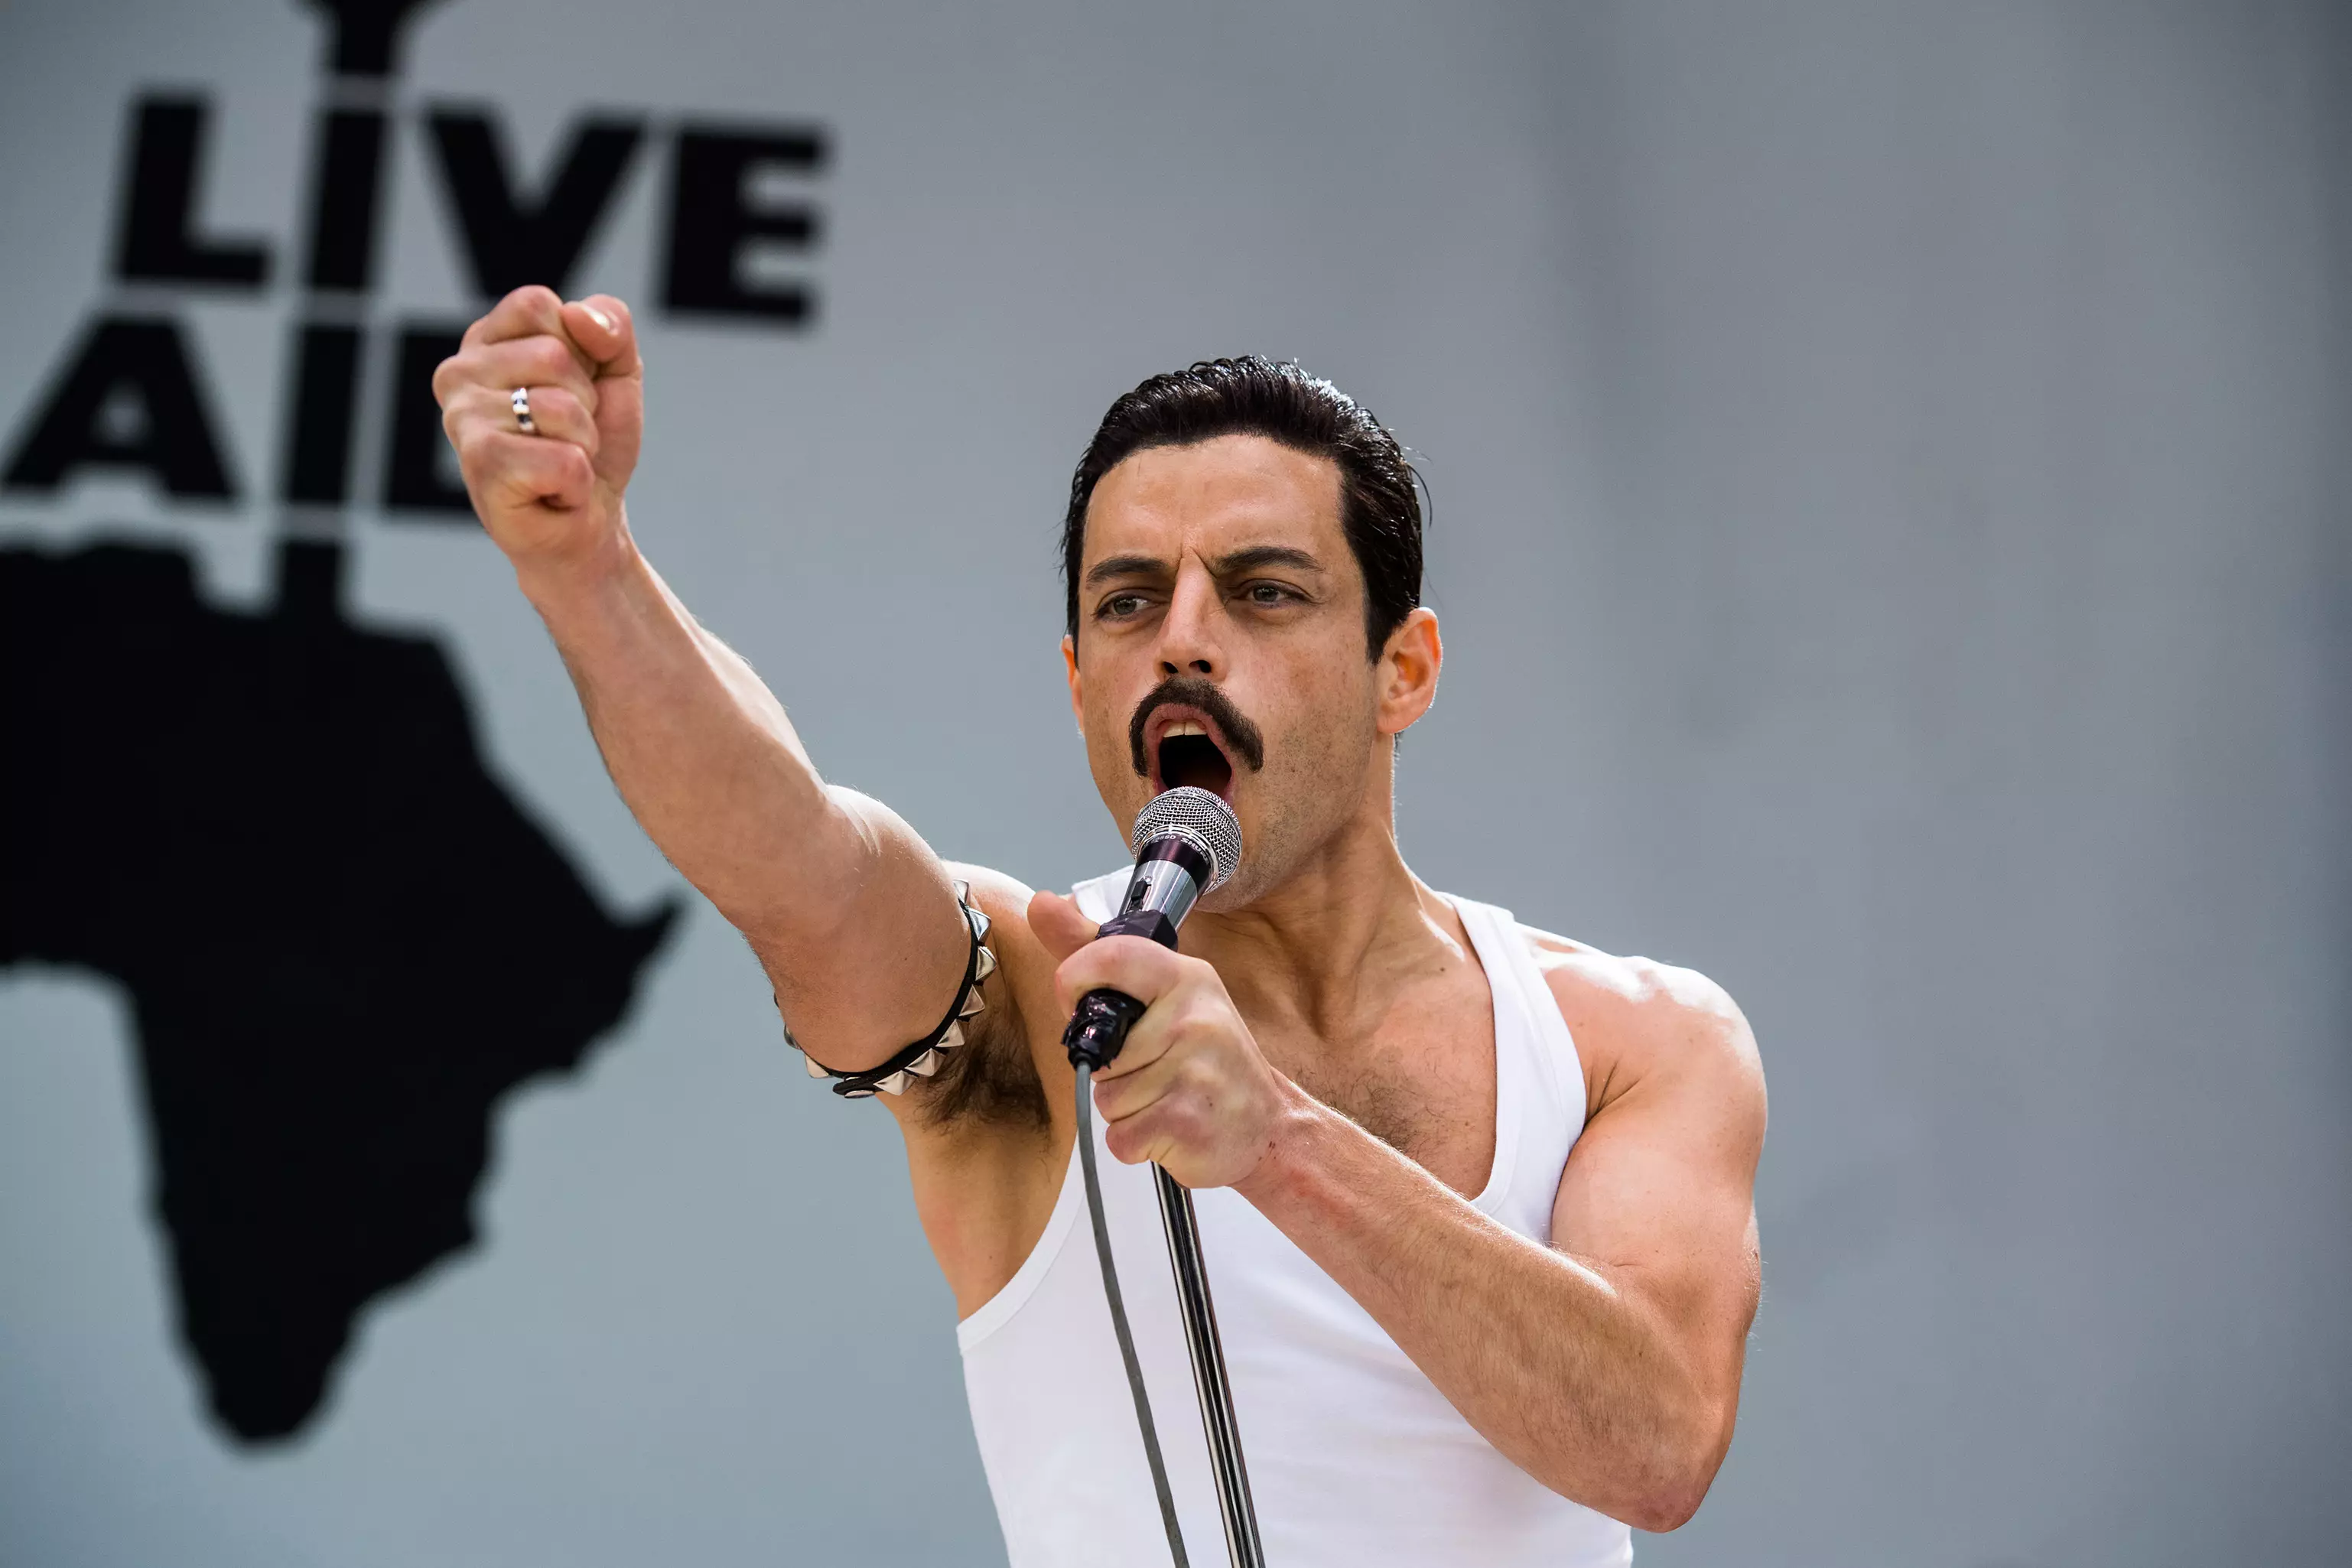 Rami Malek has been nominated for a Golden Globe for his portrayal of Freddie Mercury.